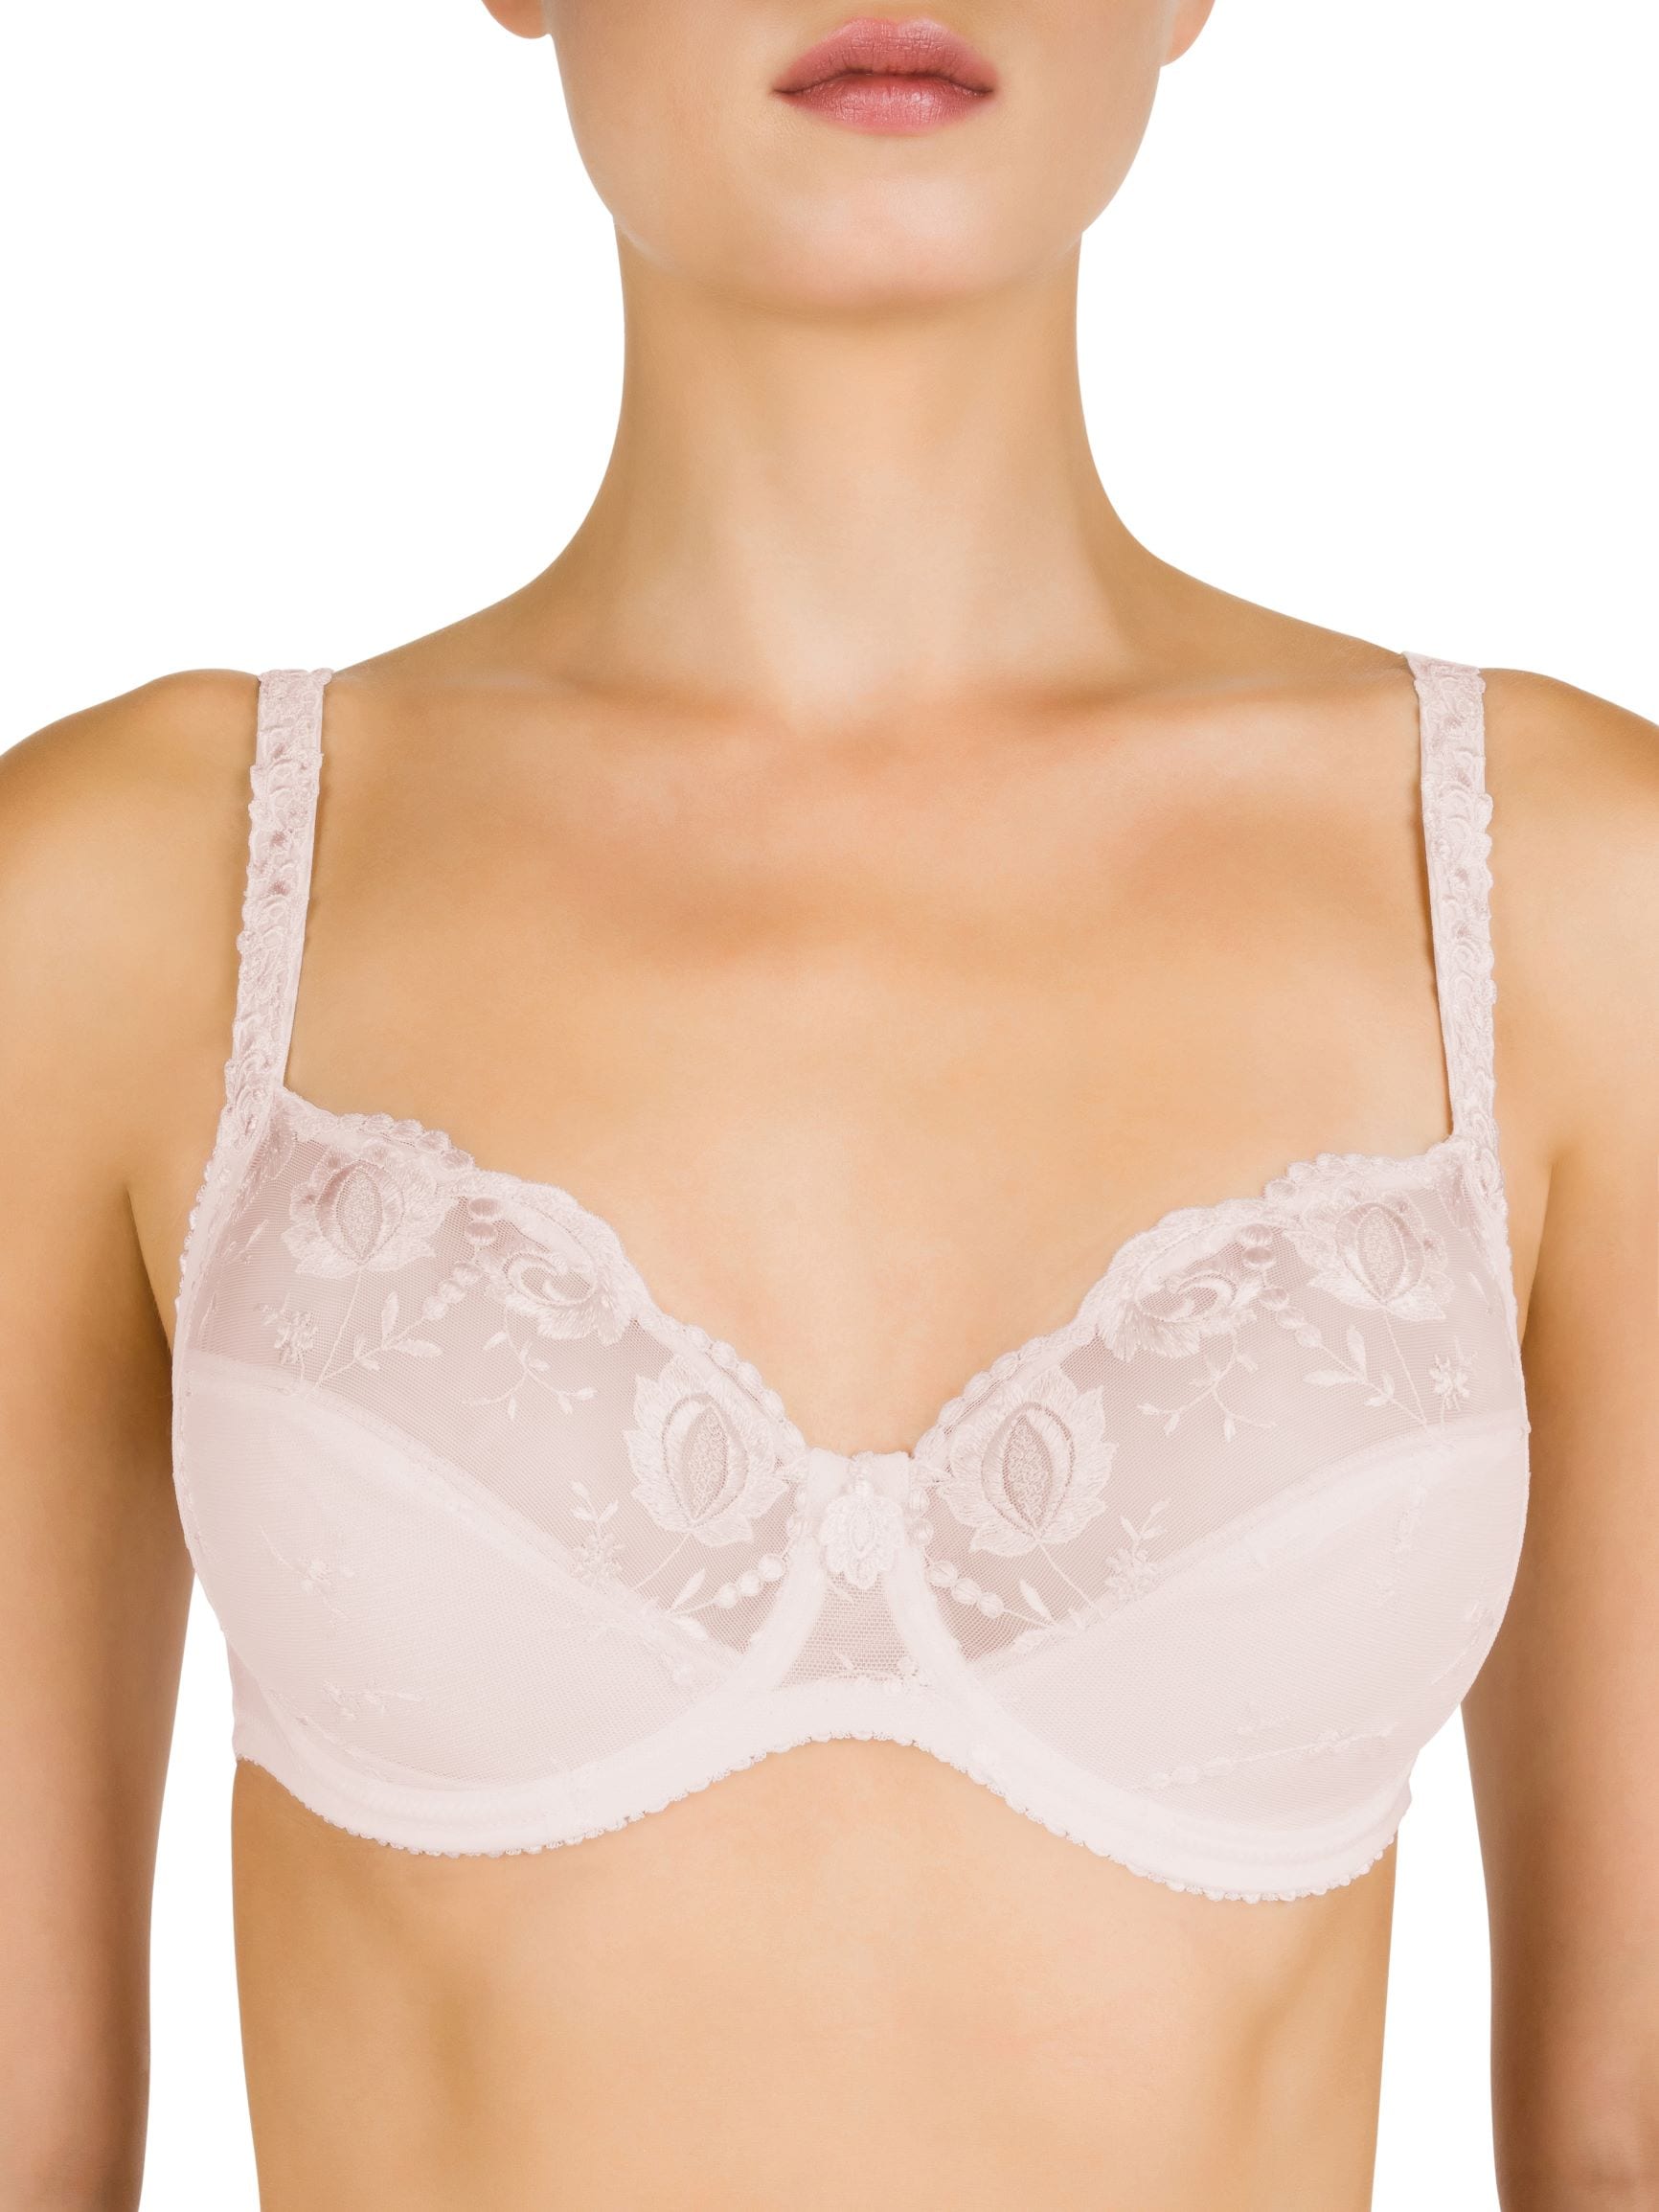 Felina Conturelle Provence Underwired Fashion Bra In Stock At UK Tights